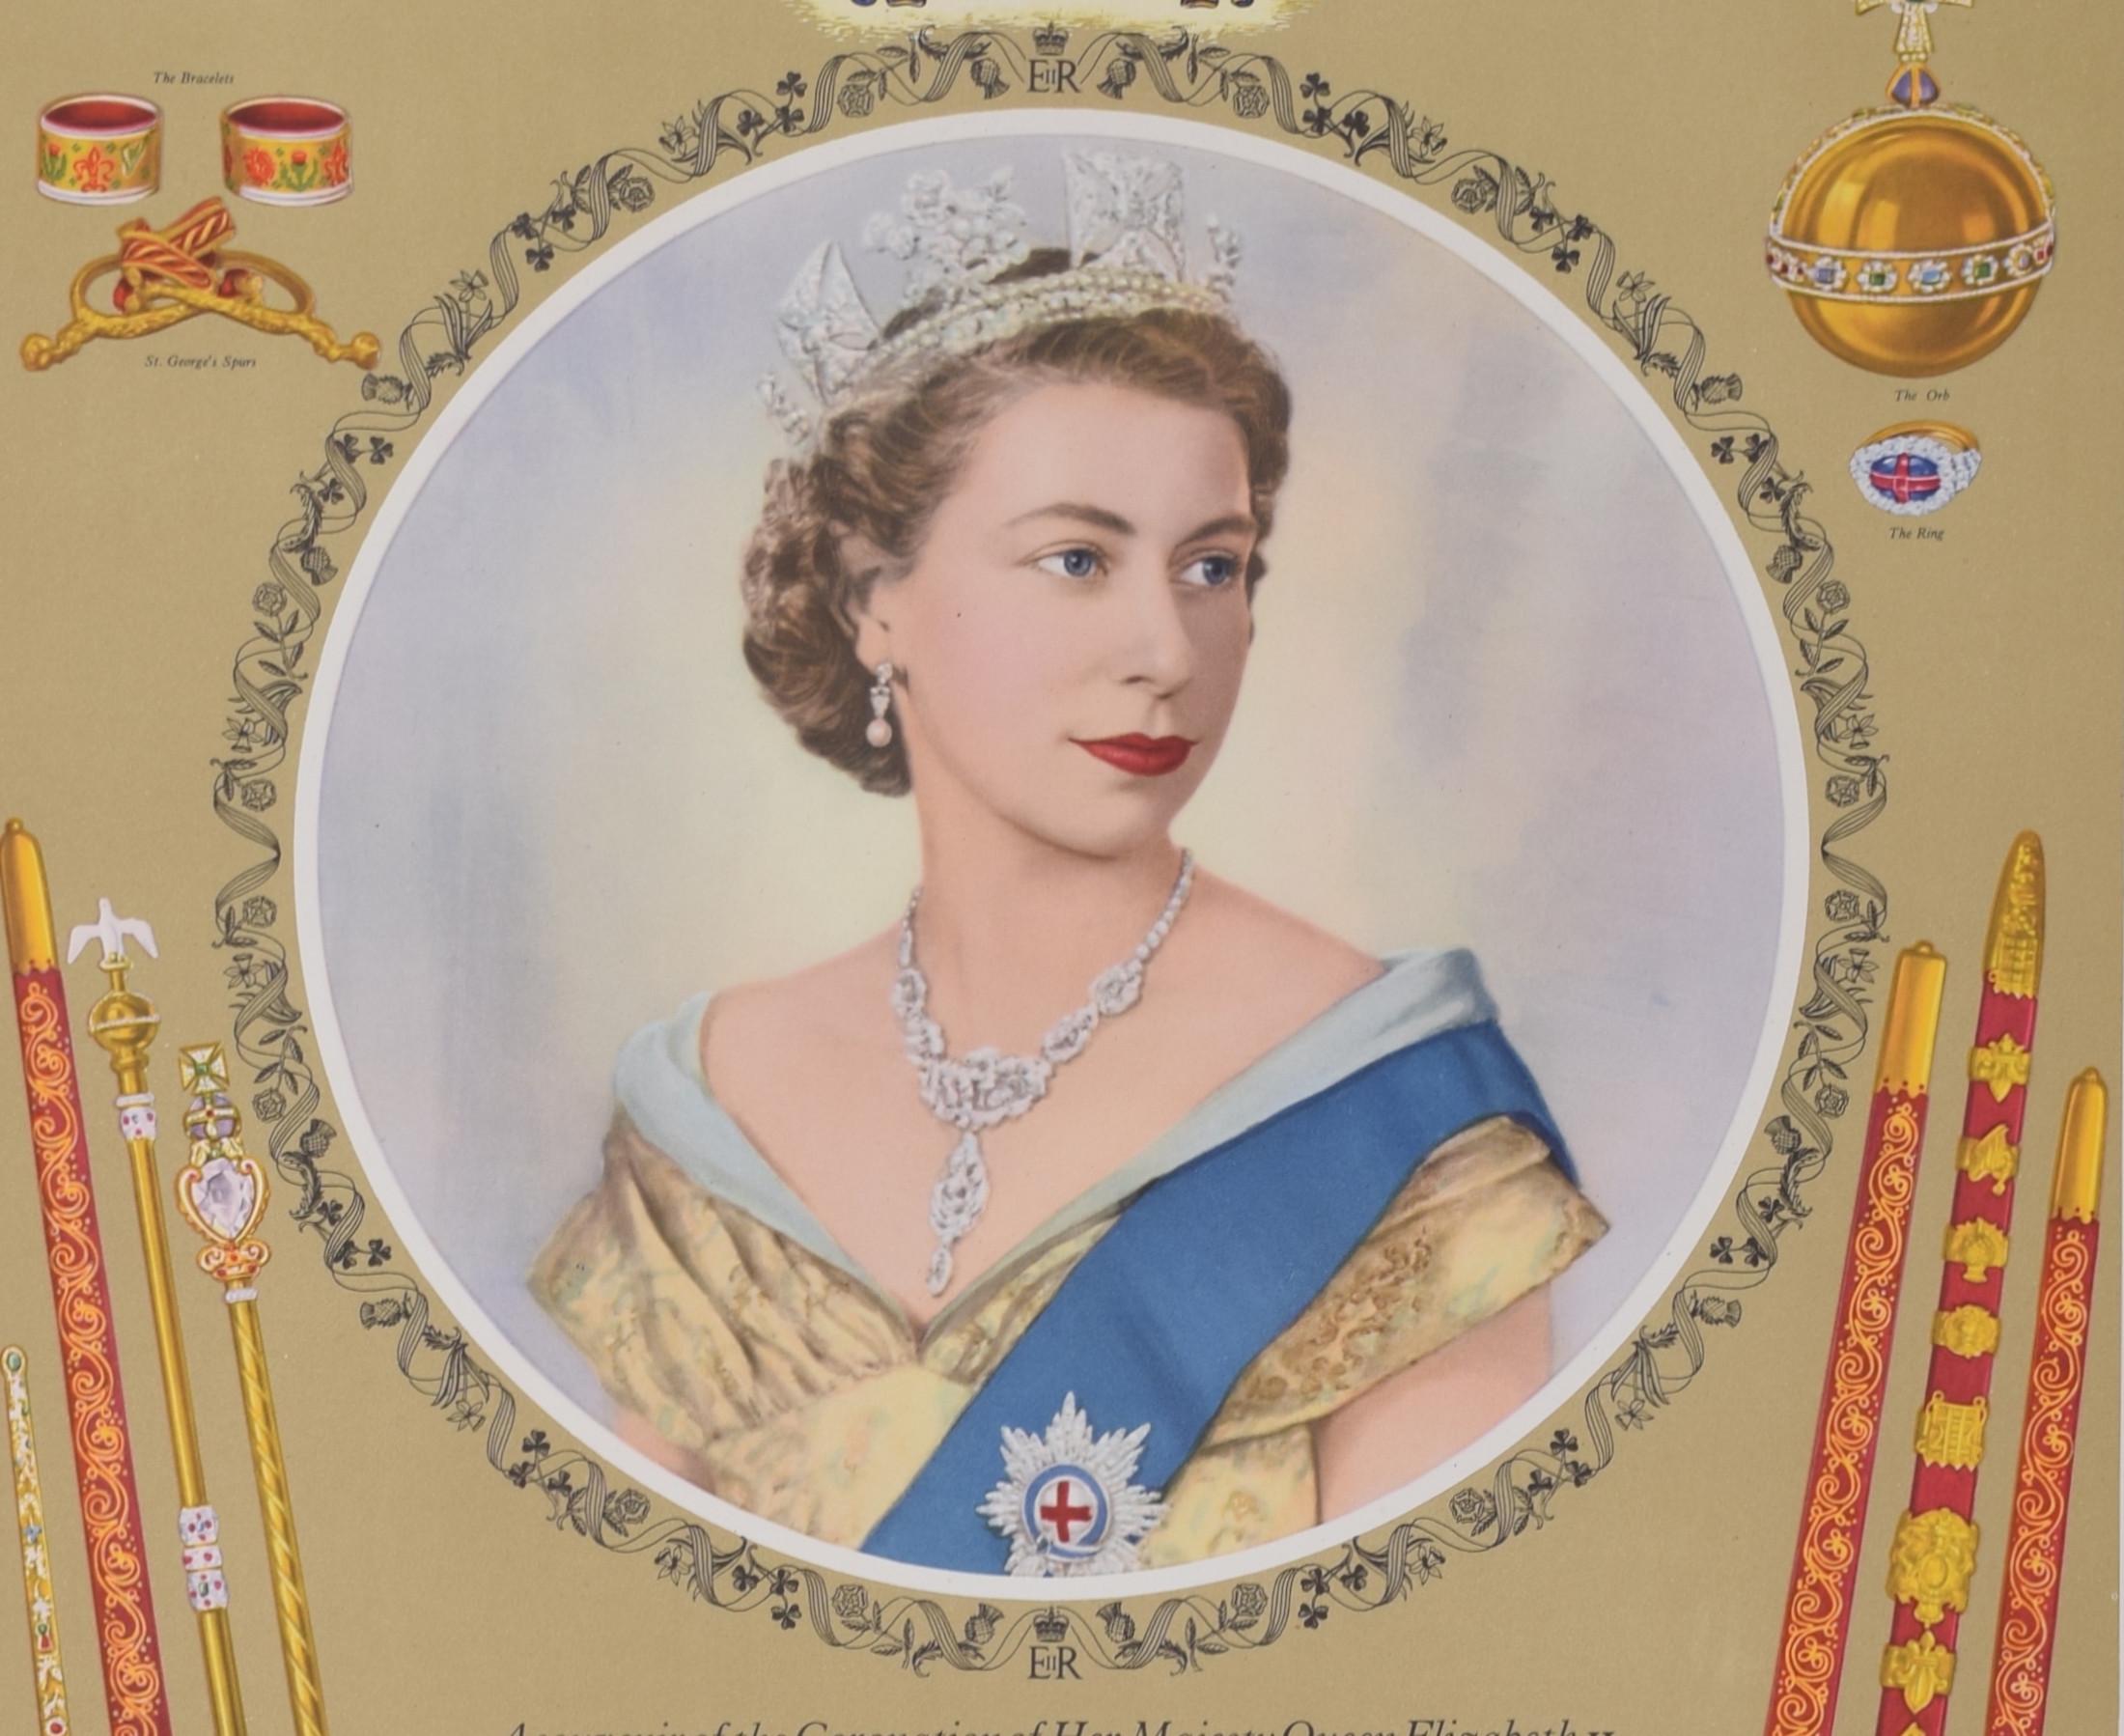 1953 Coronation Regalia of Queen Elizabeth II poster for National Savings - Print by Dorothy Wilding